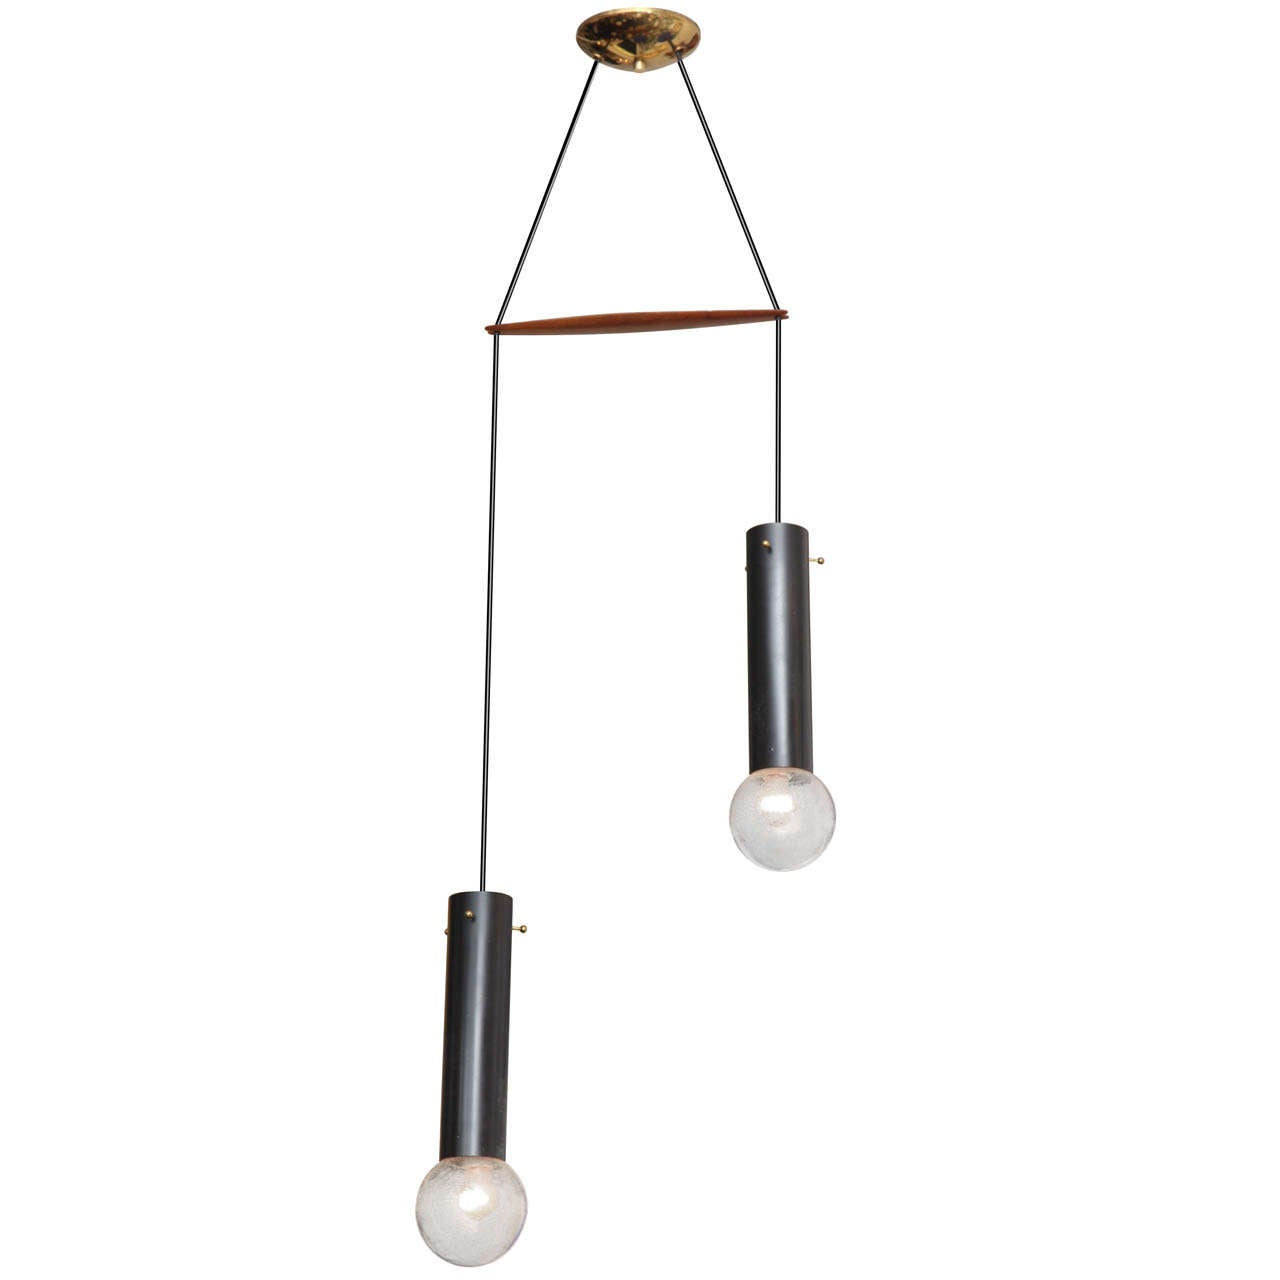 1950s Italian Modernist Ceiling Fixture with Murano Glass Globes